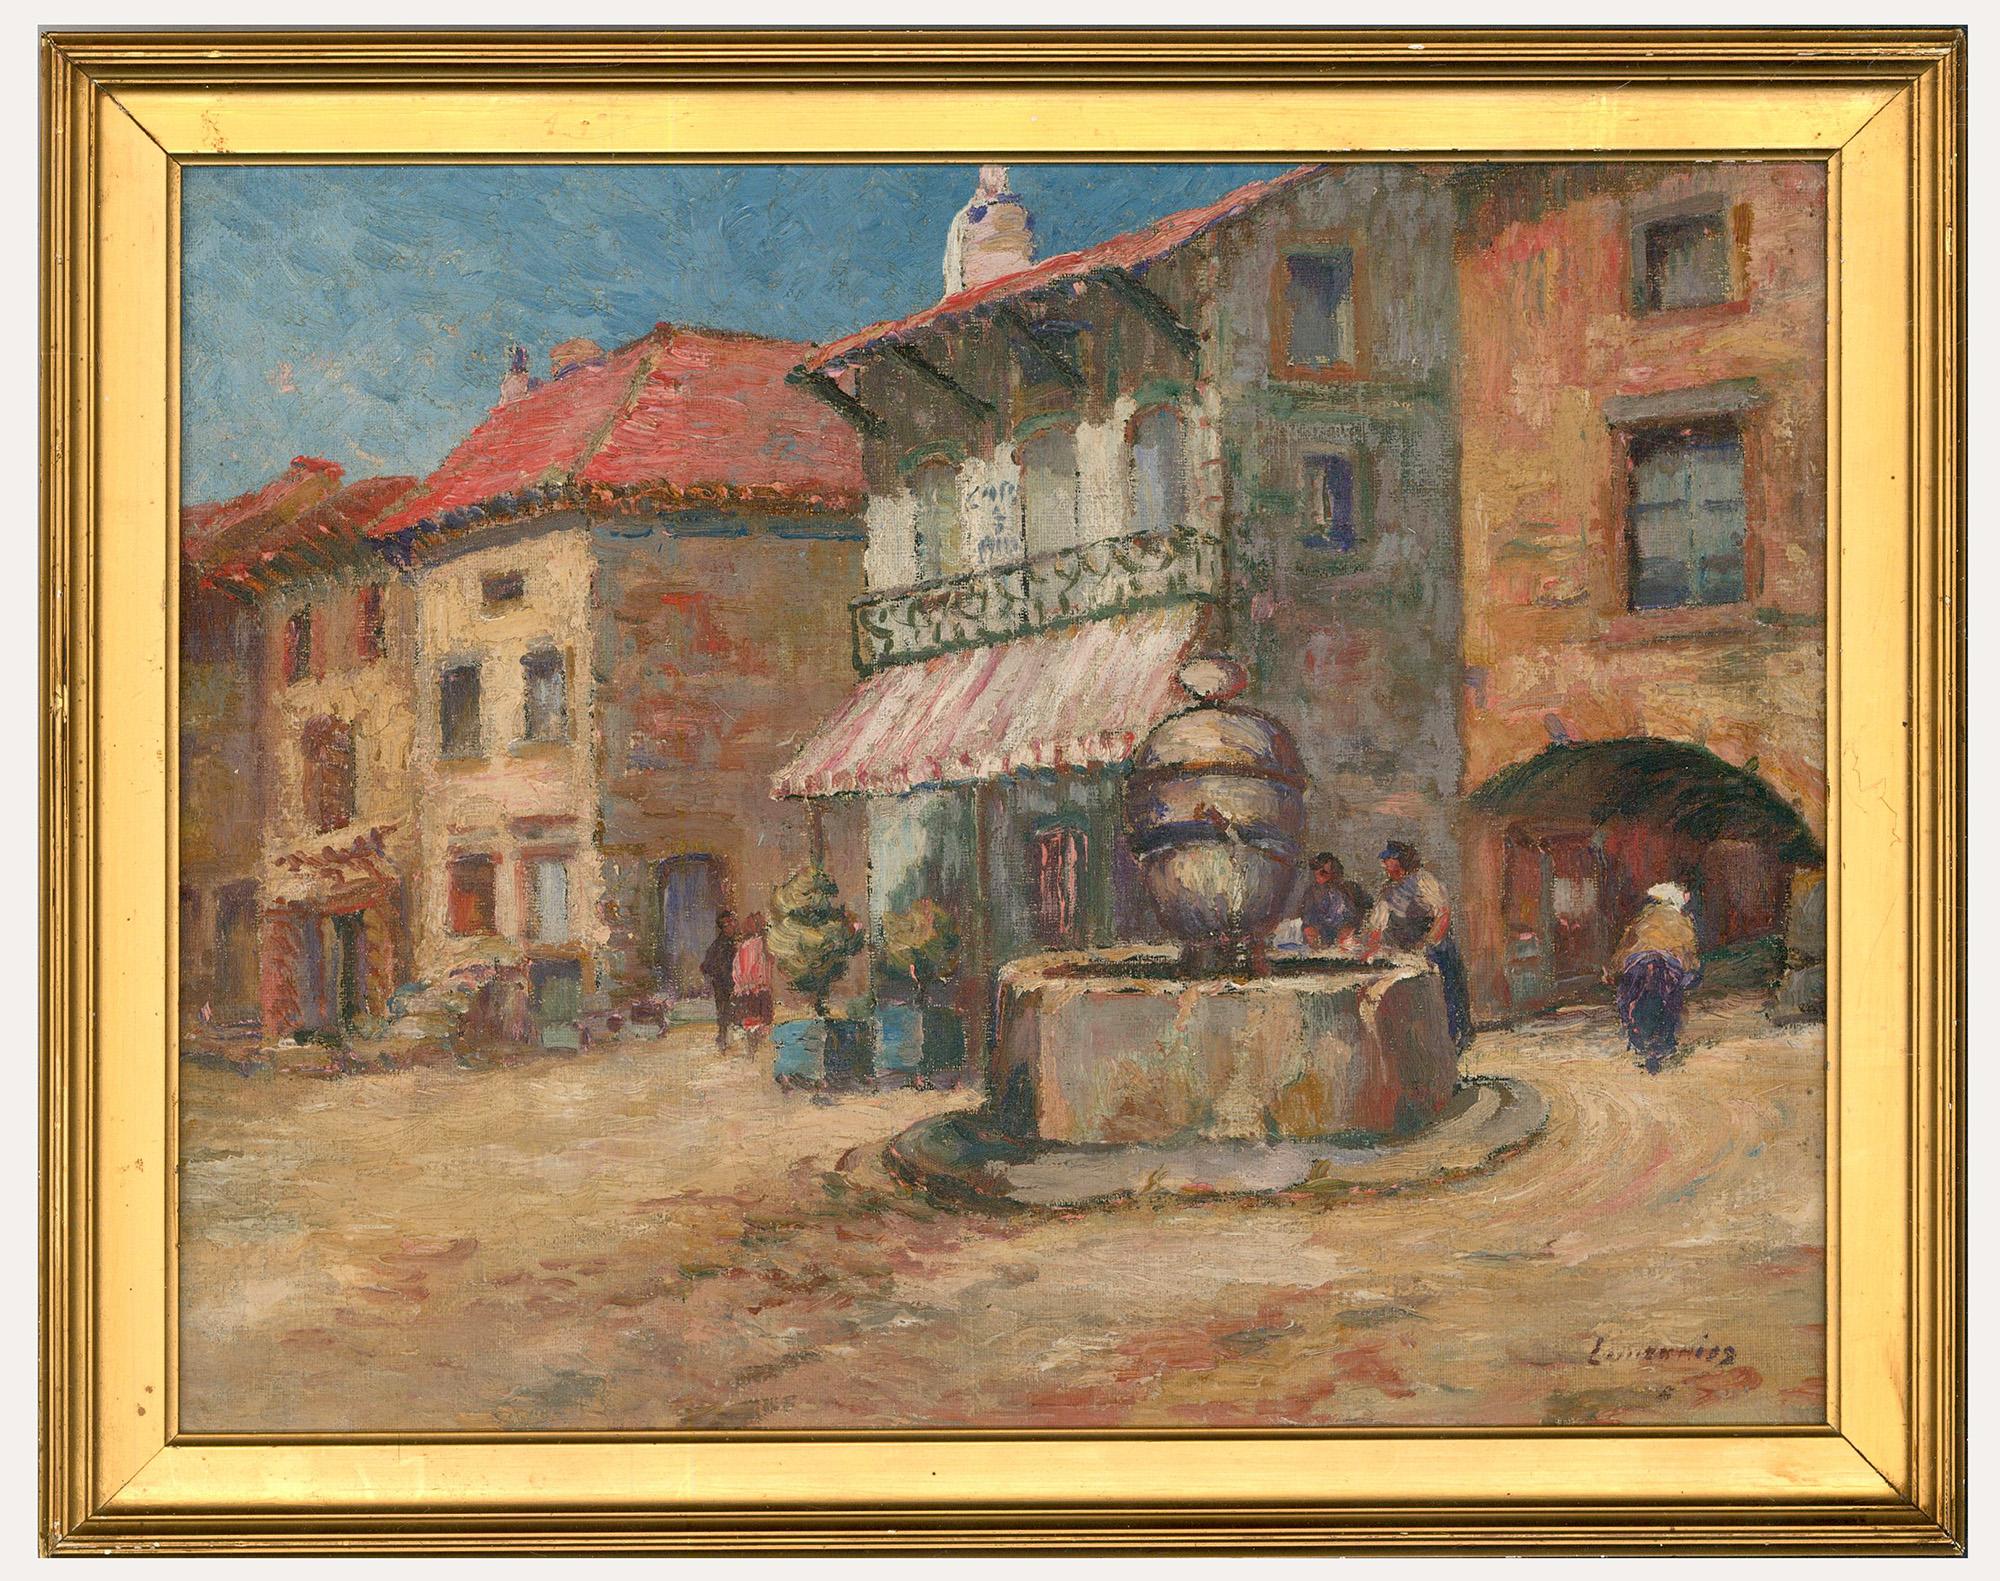 Unknown Landscape Painting - Framed Early 20th Century Oil - Spanish Town Square